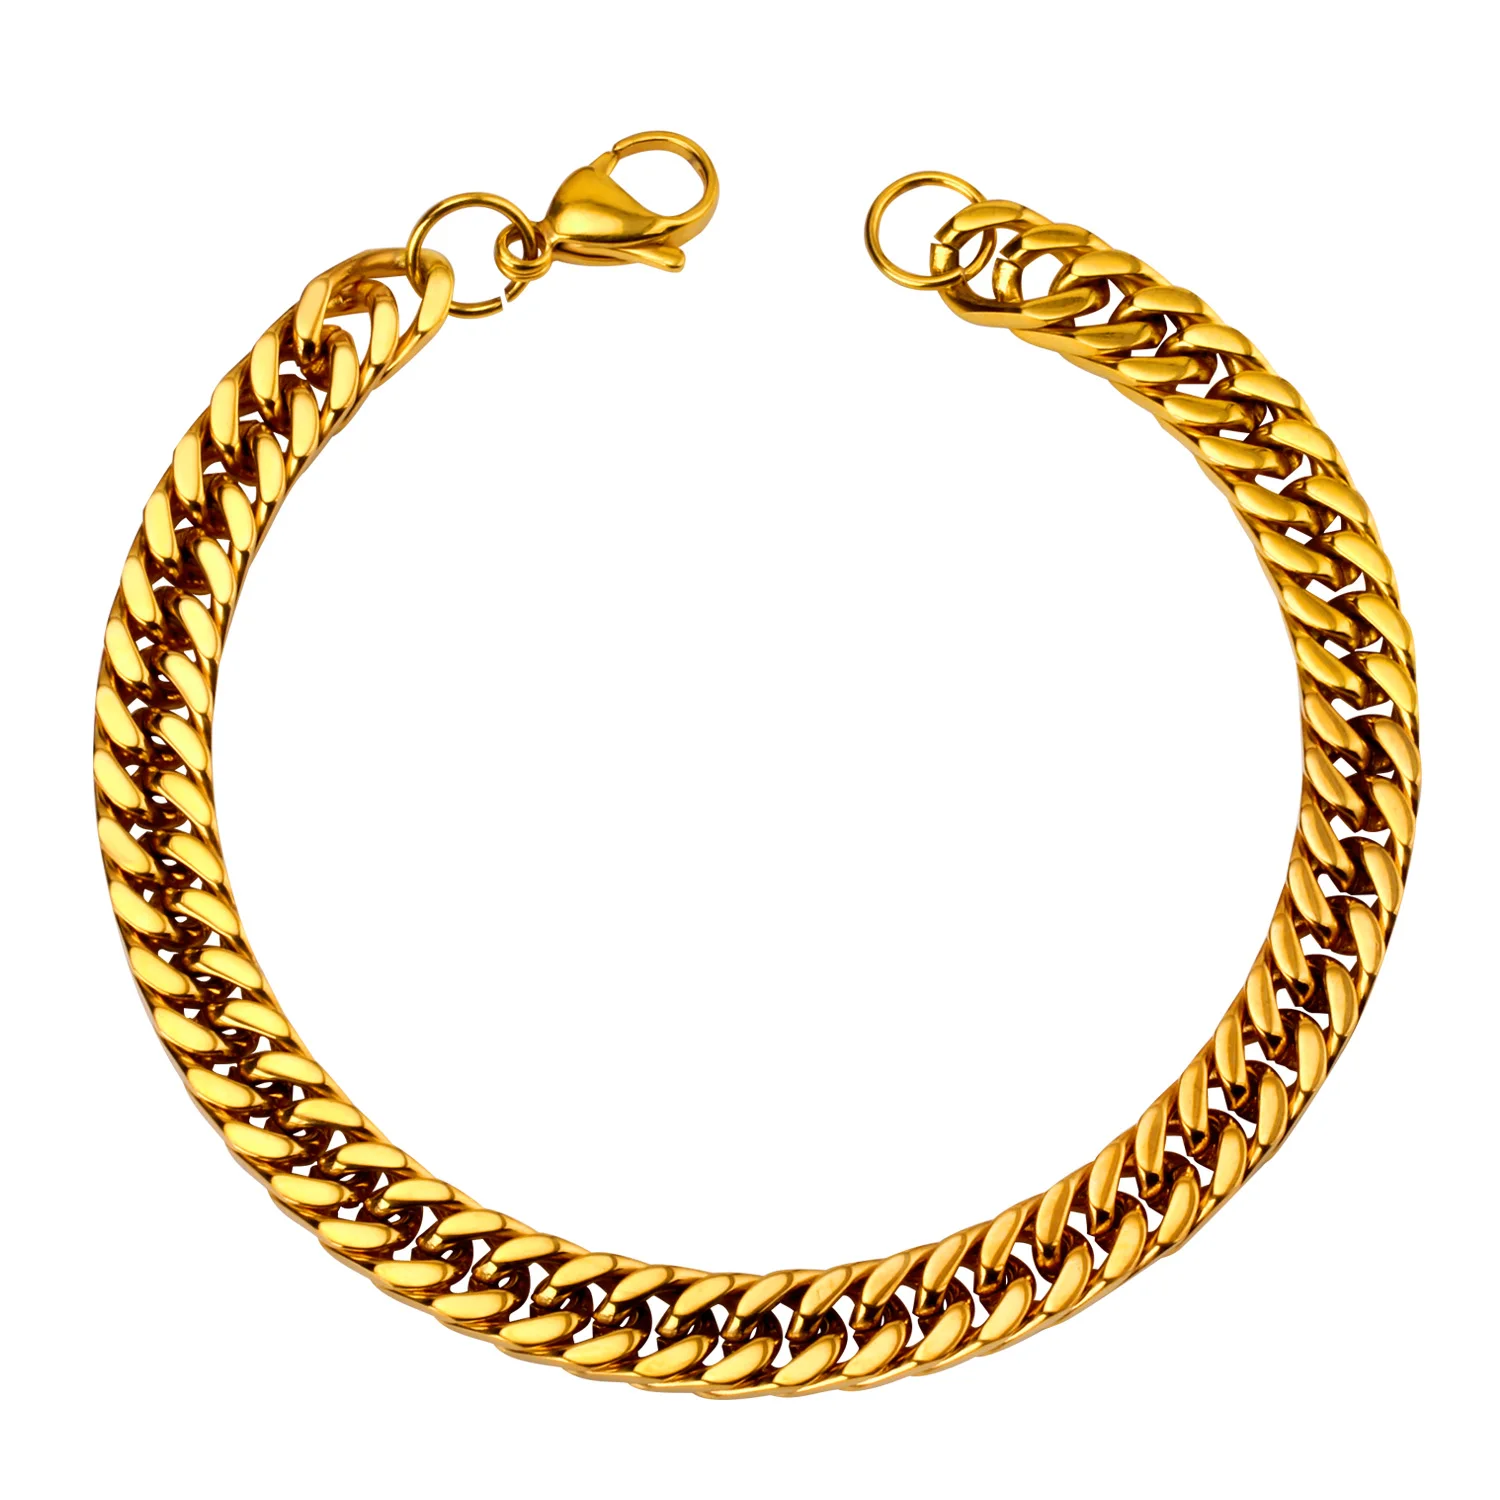 LIFETIME JEWELRY 7mm Polished Cuban Link Chain Necklace for Women & Men 24k Gold Plated 